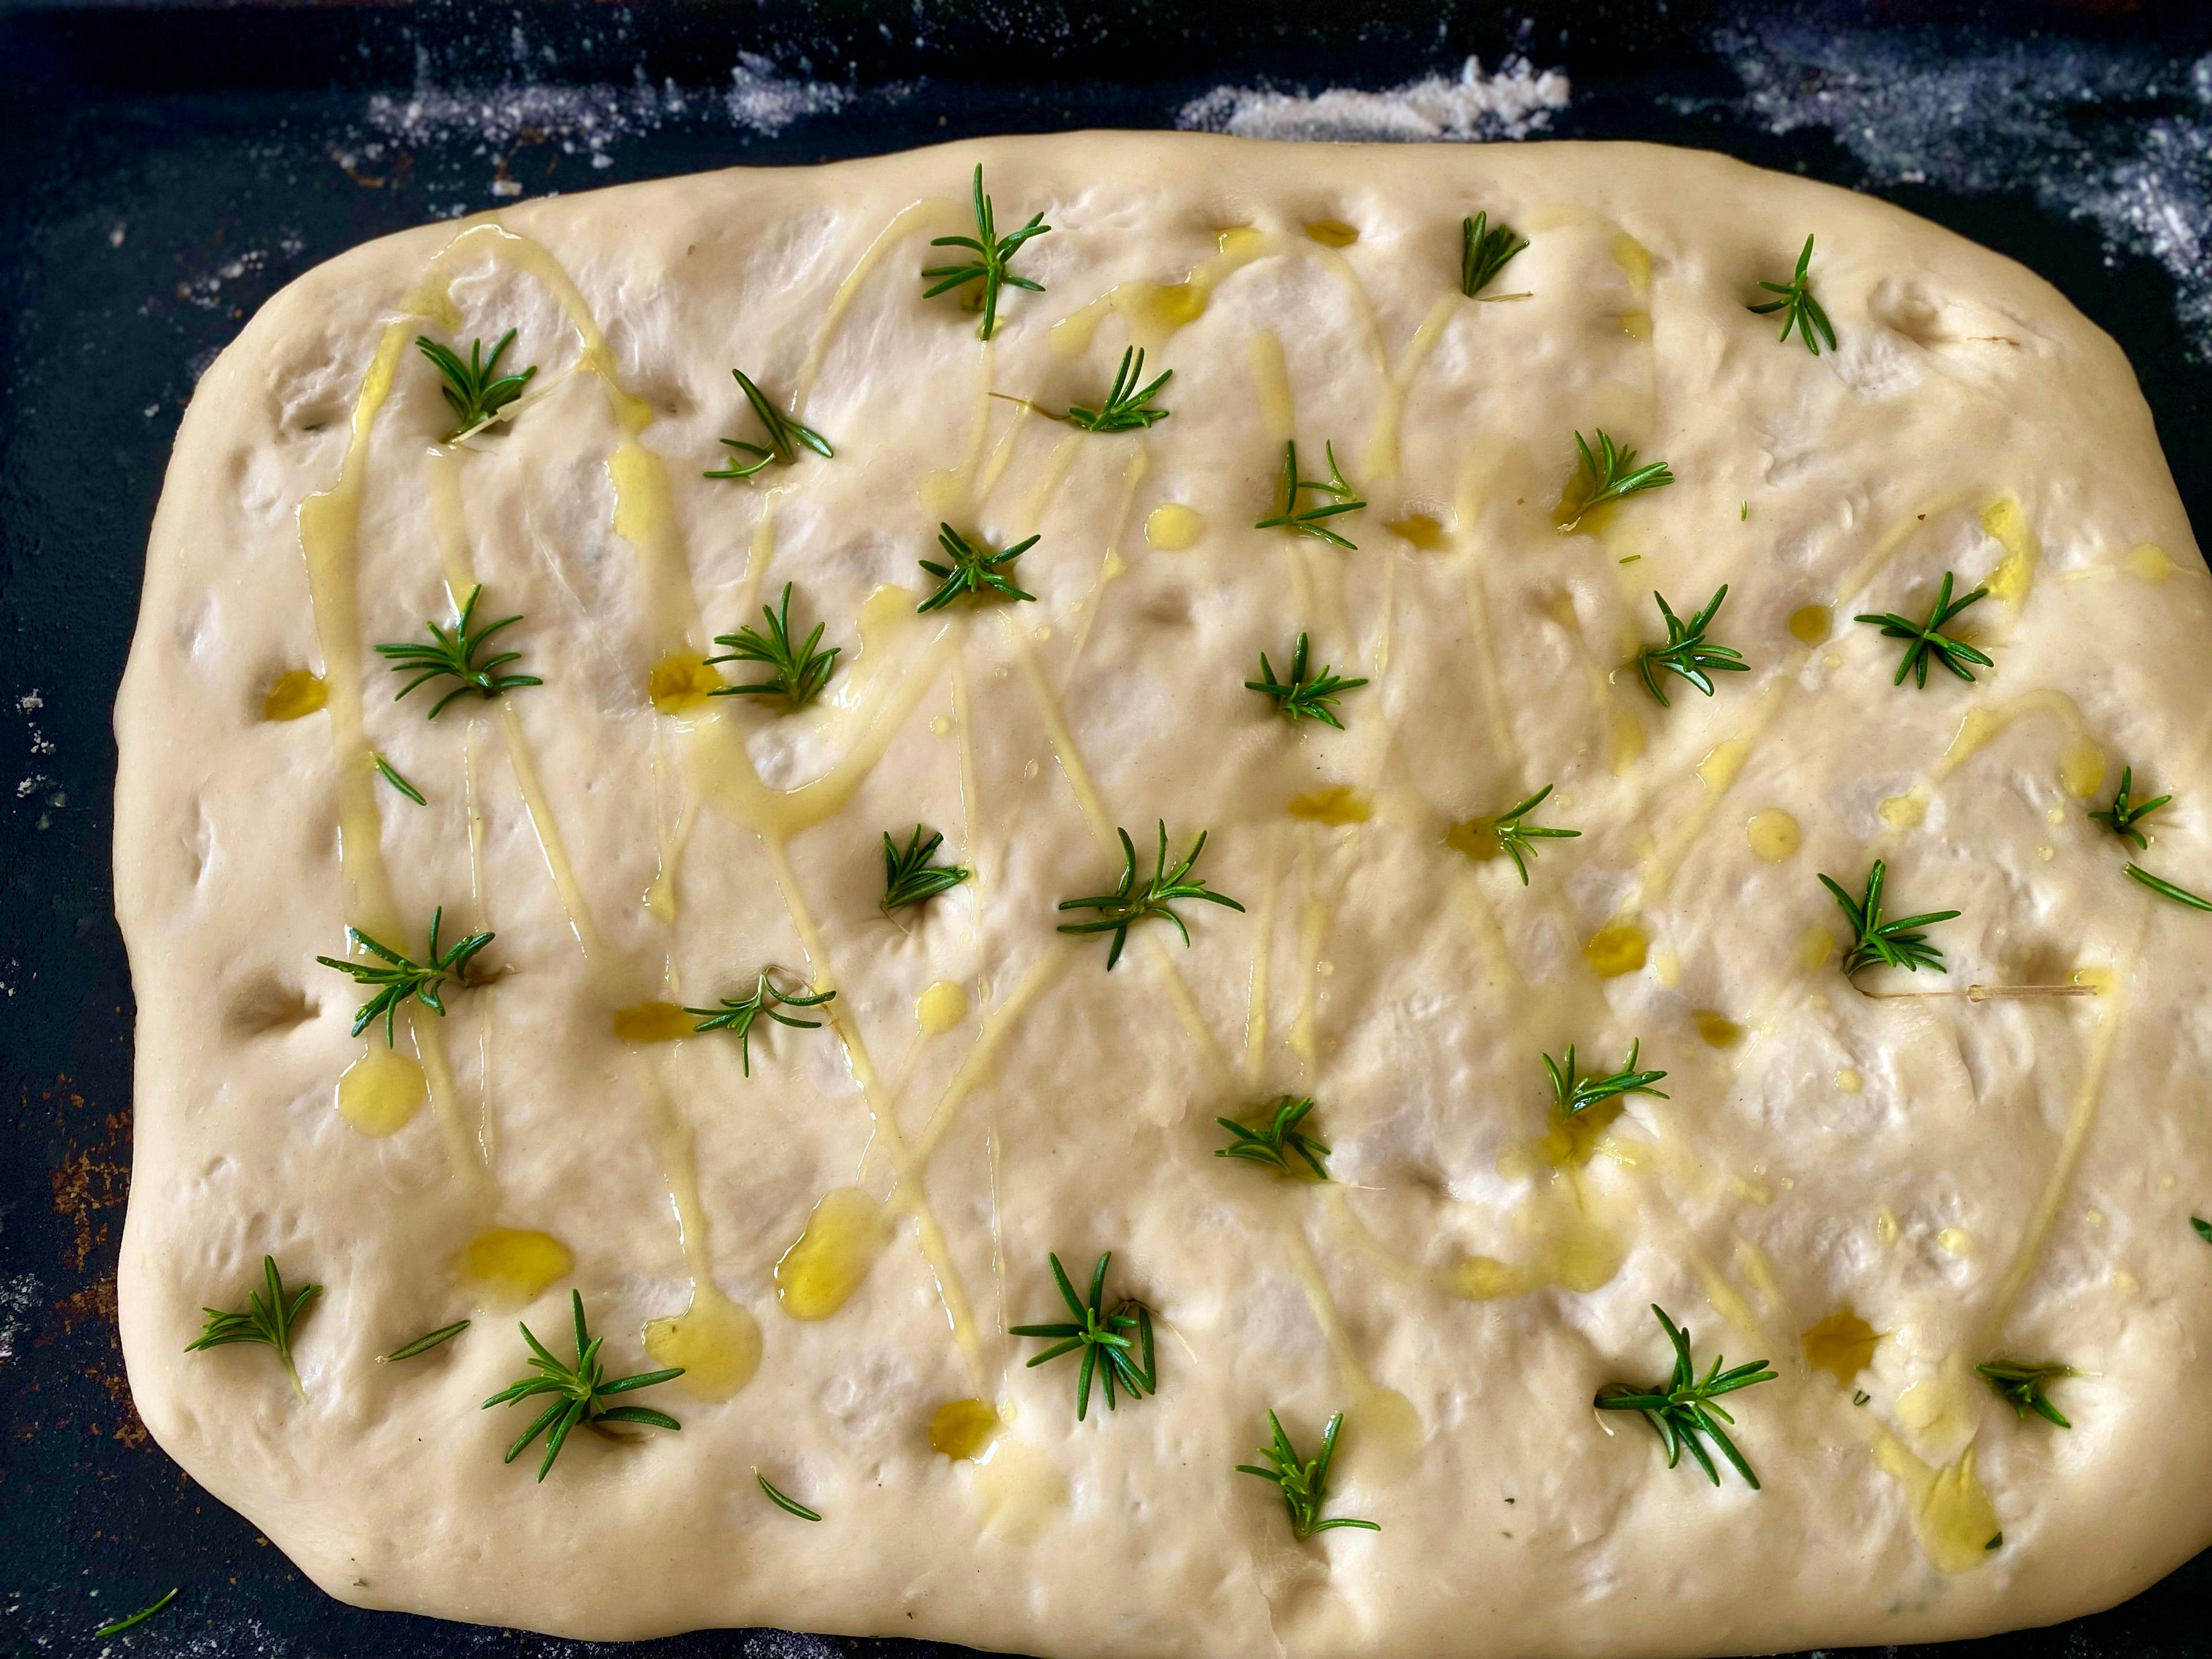 focaccia dough with little bunches of rosemary and drizzled oil